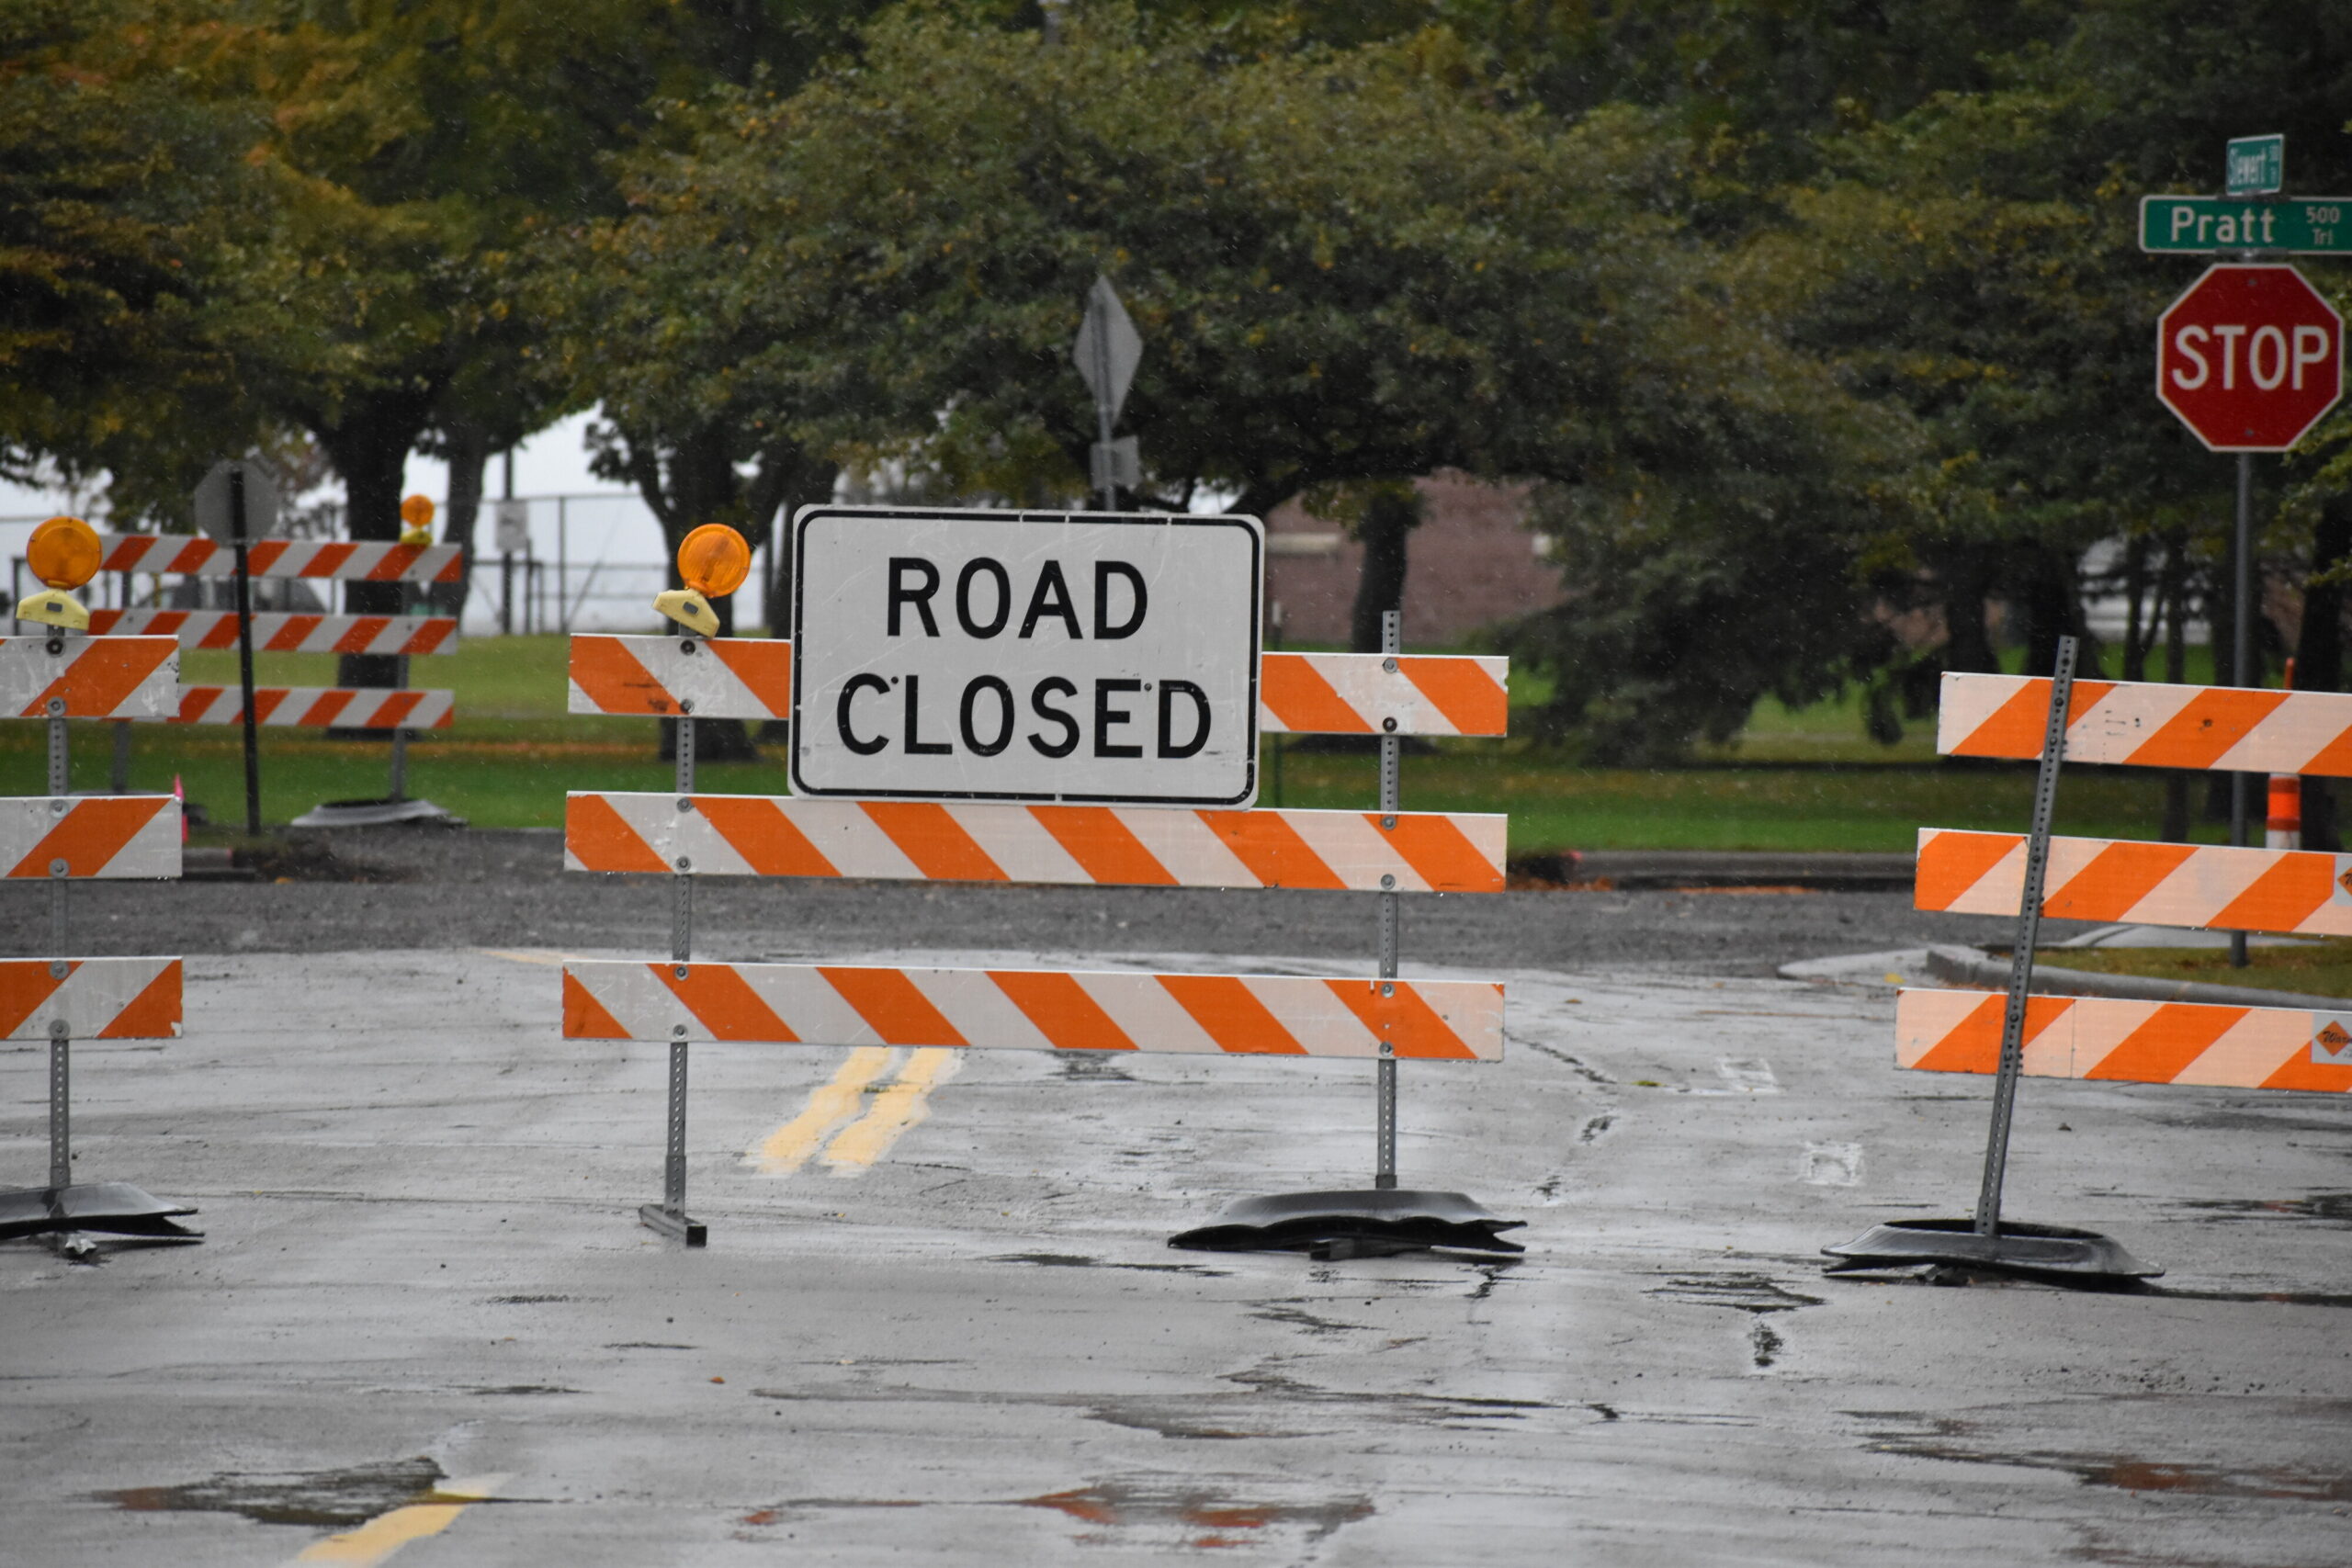 Road closed signs are displayed at Menominee Park in Oshkosh